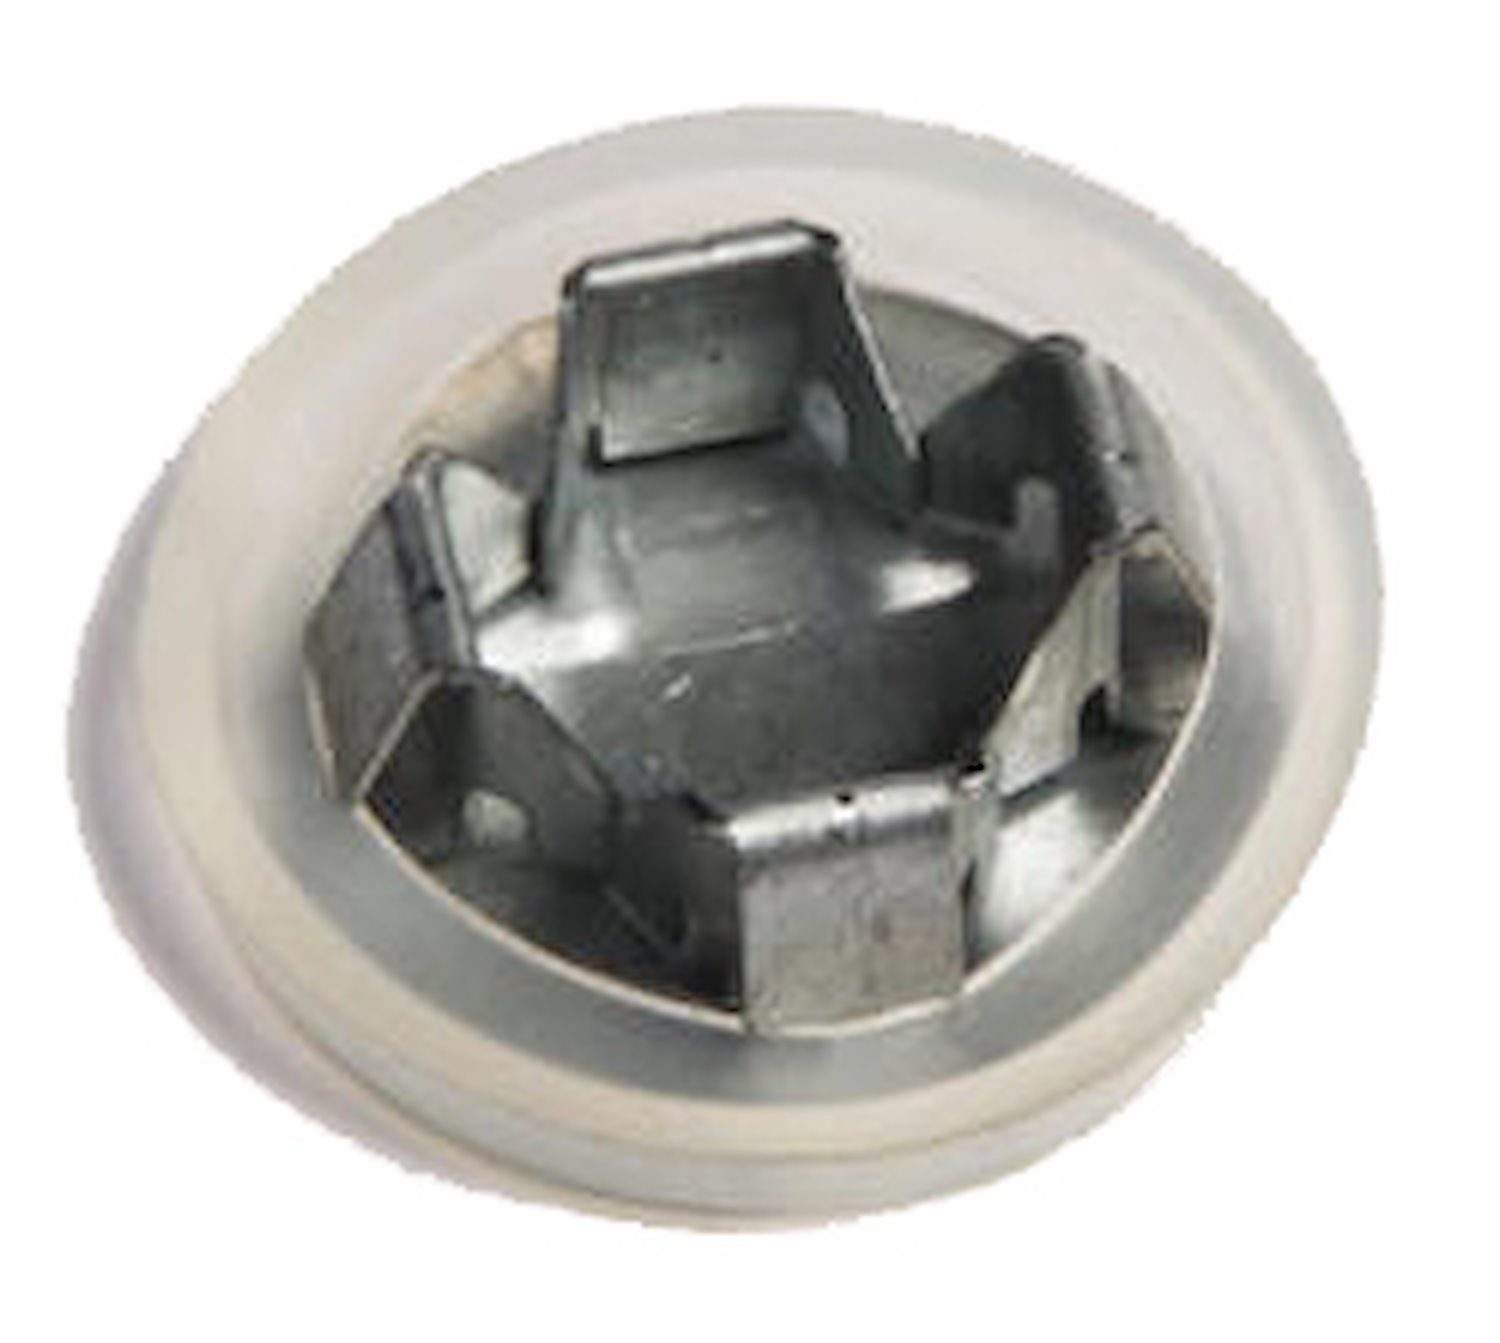 This floor pan plug from Omix-ADA fits 84-95 Jeep Cherokee XJ and 87-95 Wrangler YJ. Sold individually.